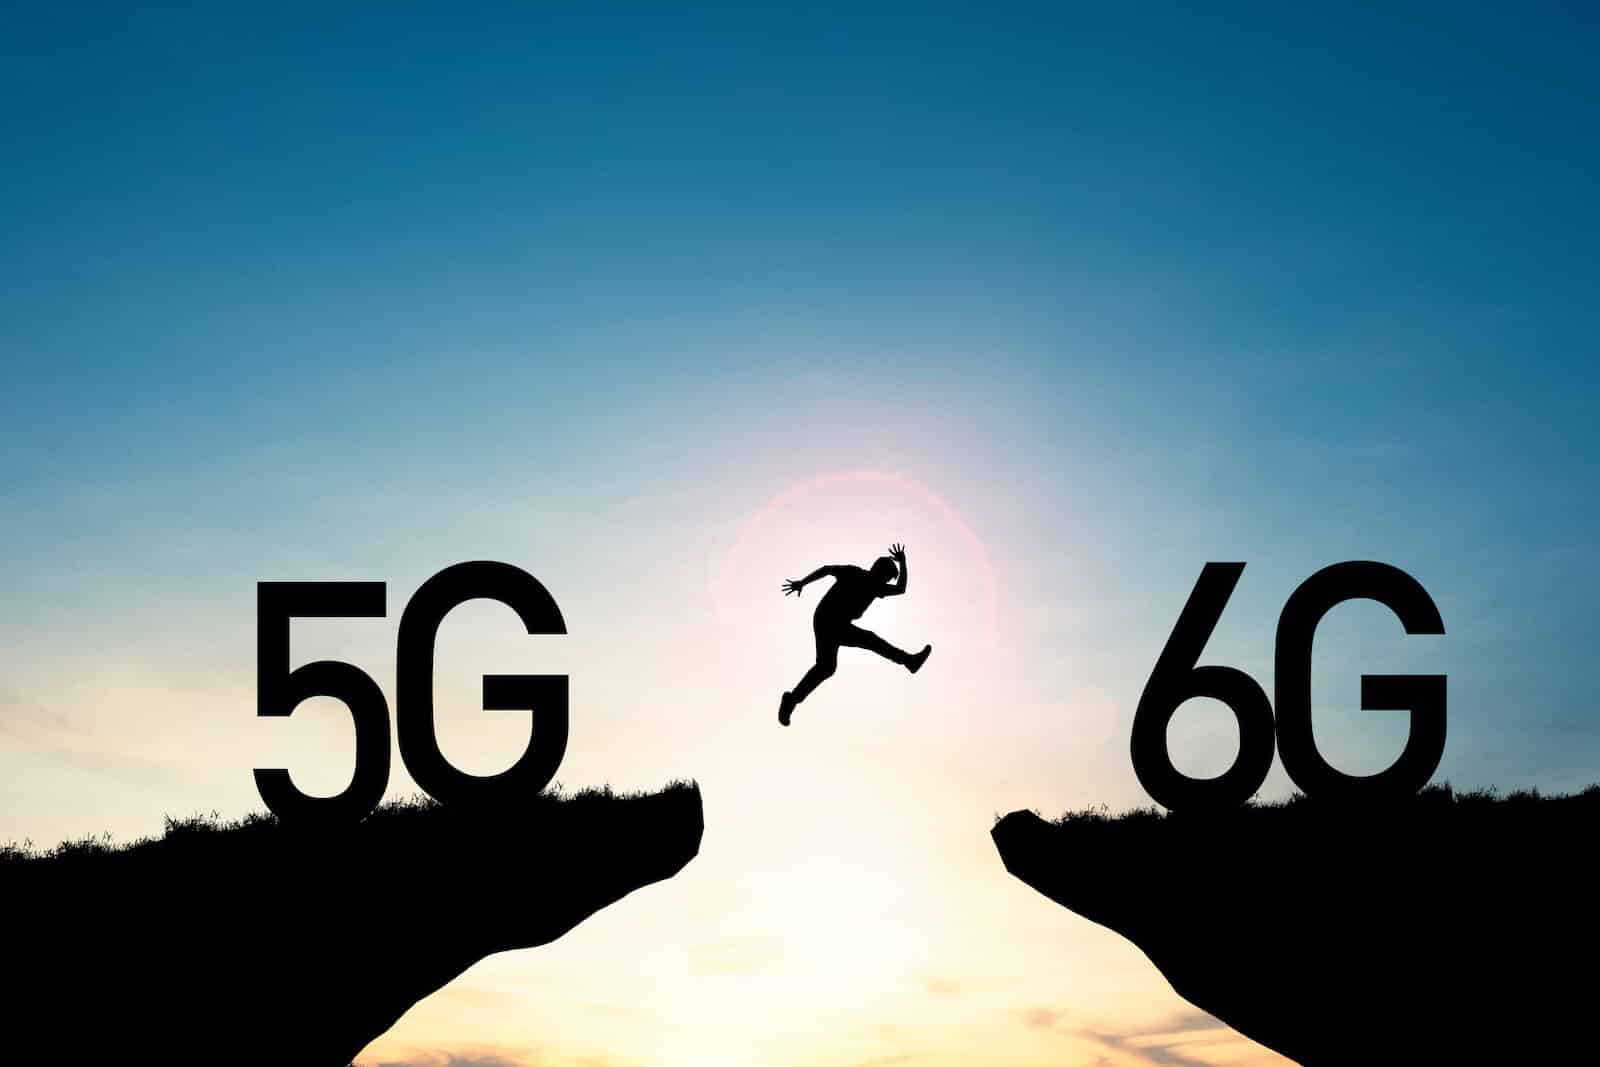 Man jumping from cliff with 5g sign to cliff with 6g sign